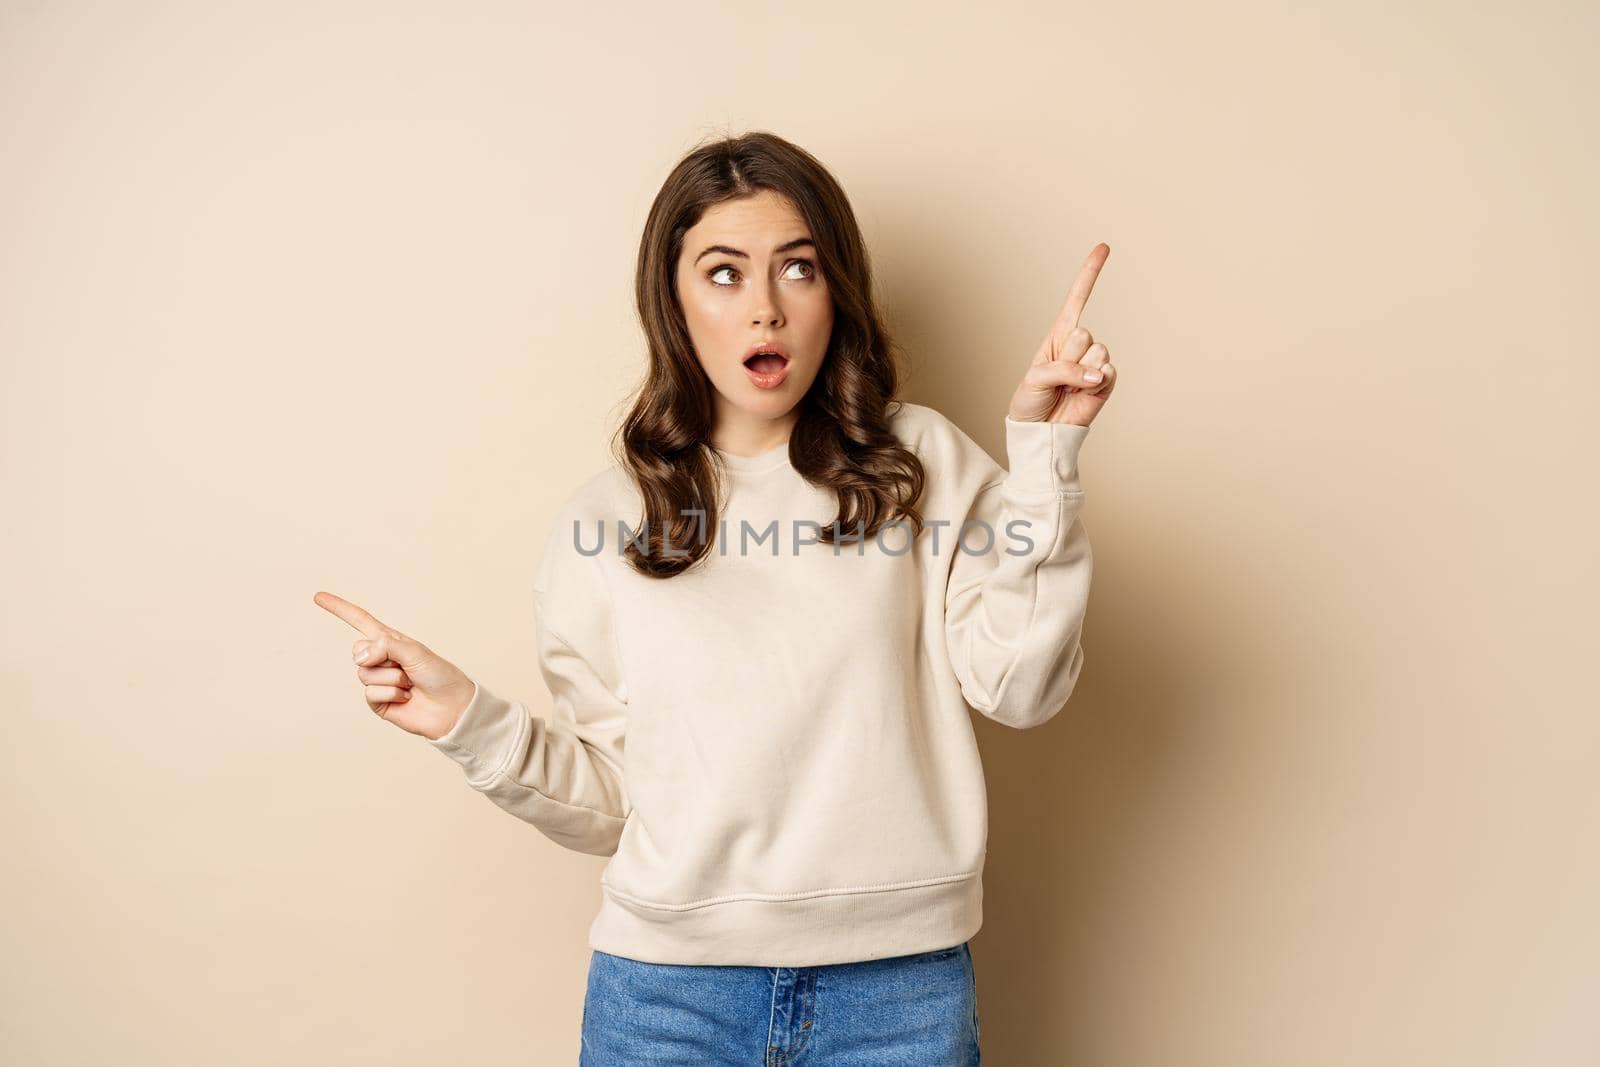 Confused girl shopper pointing sideways, making choice, decision between two variants, beige background. Copy space